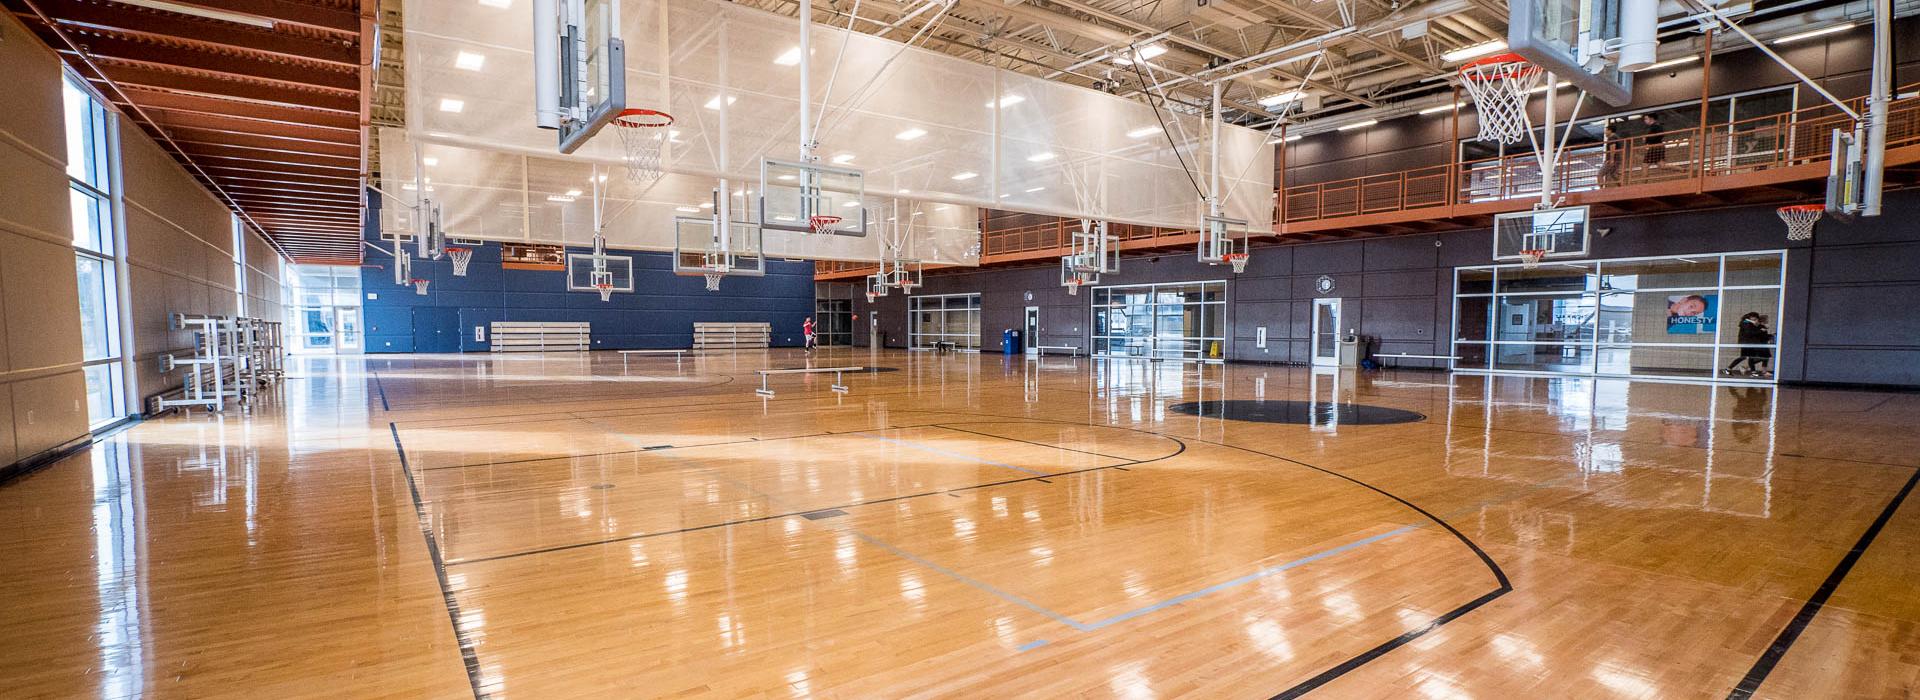 Simple Indoor Basketball Courts Open 24 Hours Near Me for Women